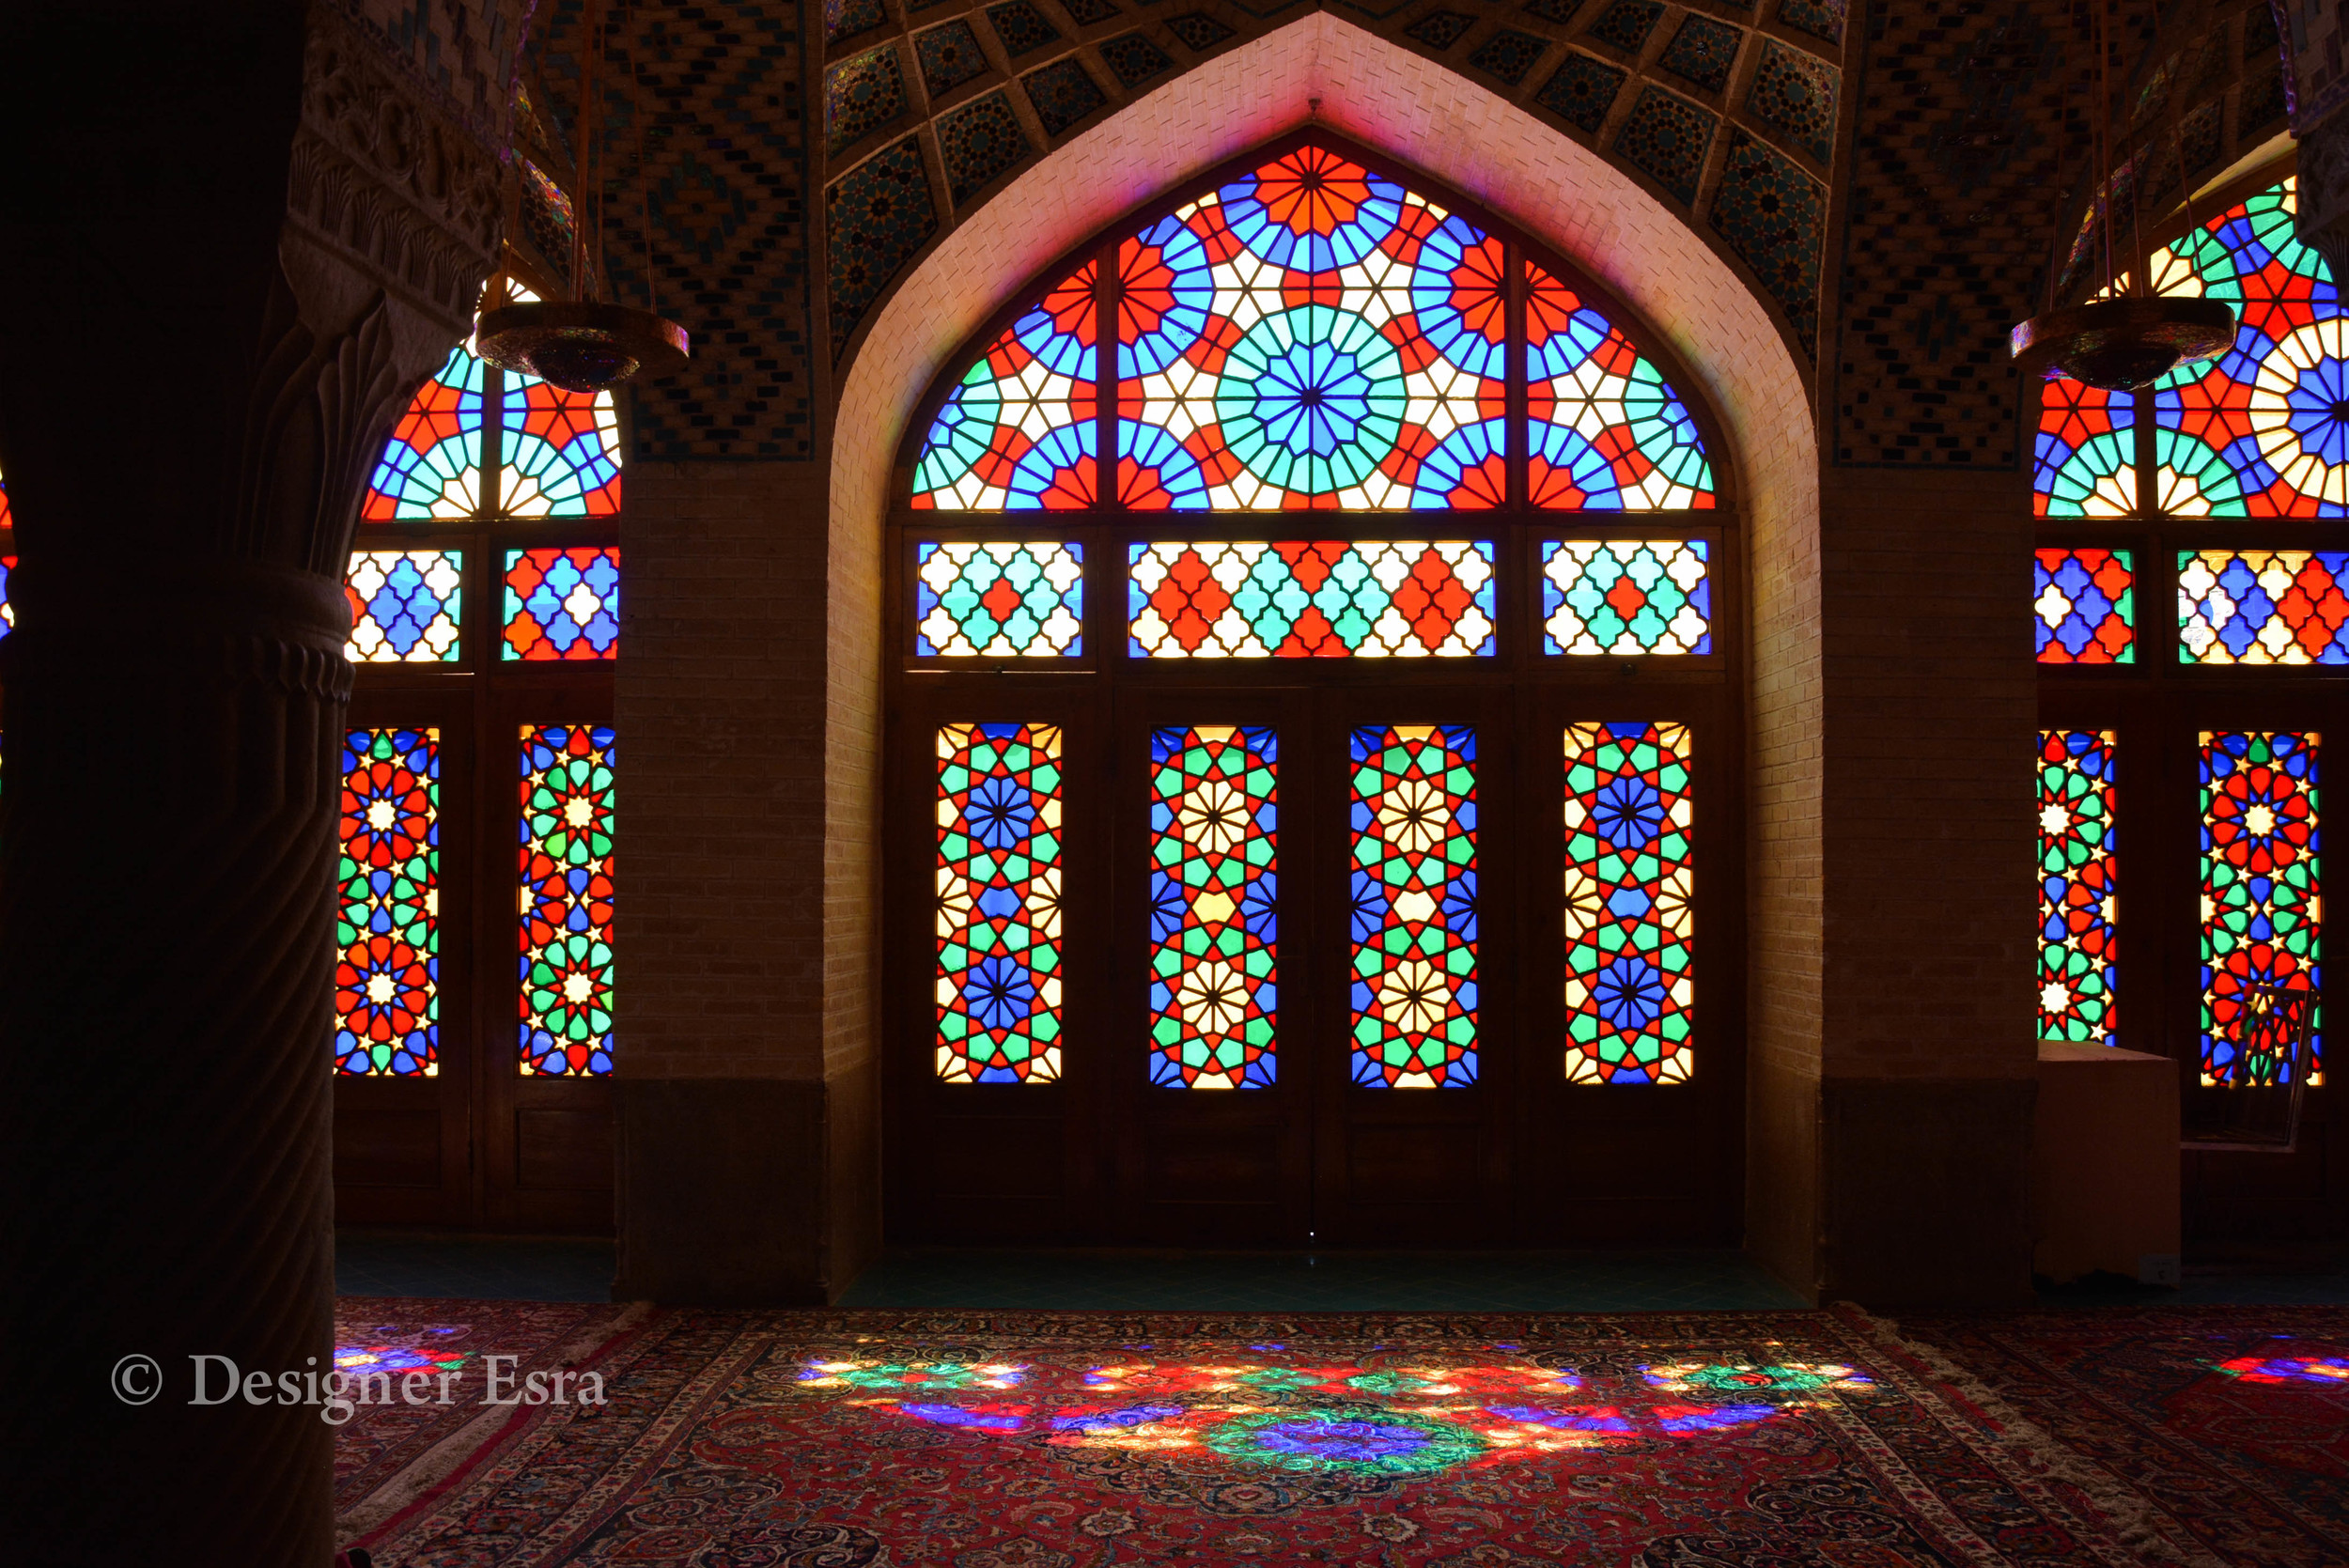 Stain glass reflection in Nasir Almulk Mosque ( Pink Mosque)